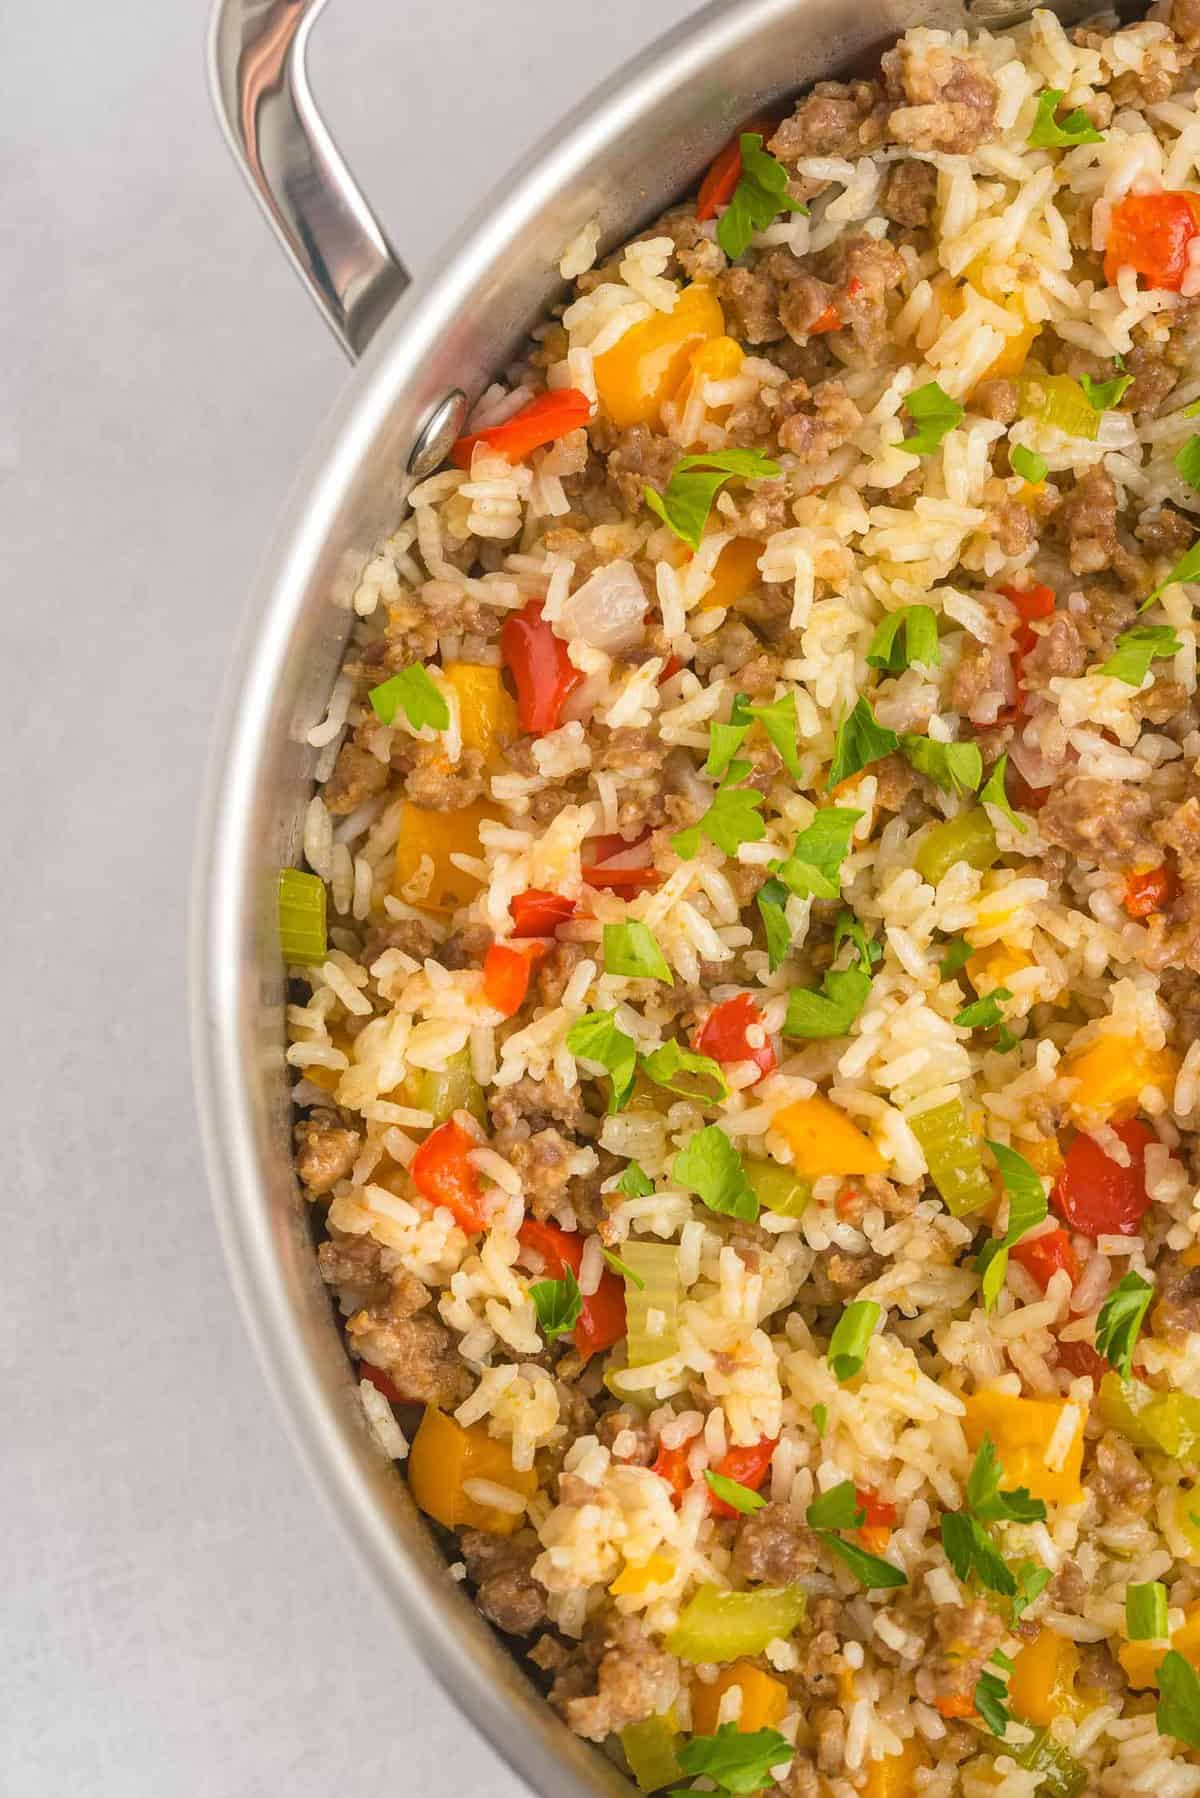 A skillet full of rice and sausage and peppers.